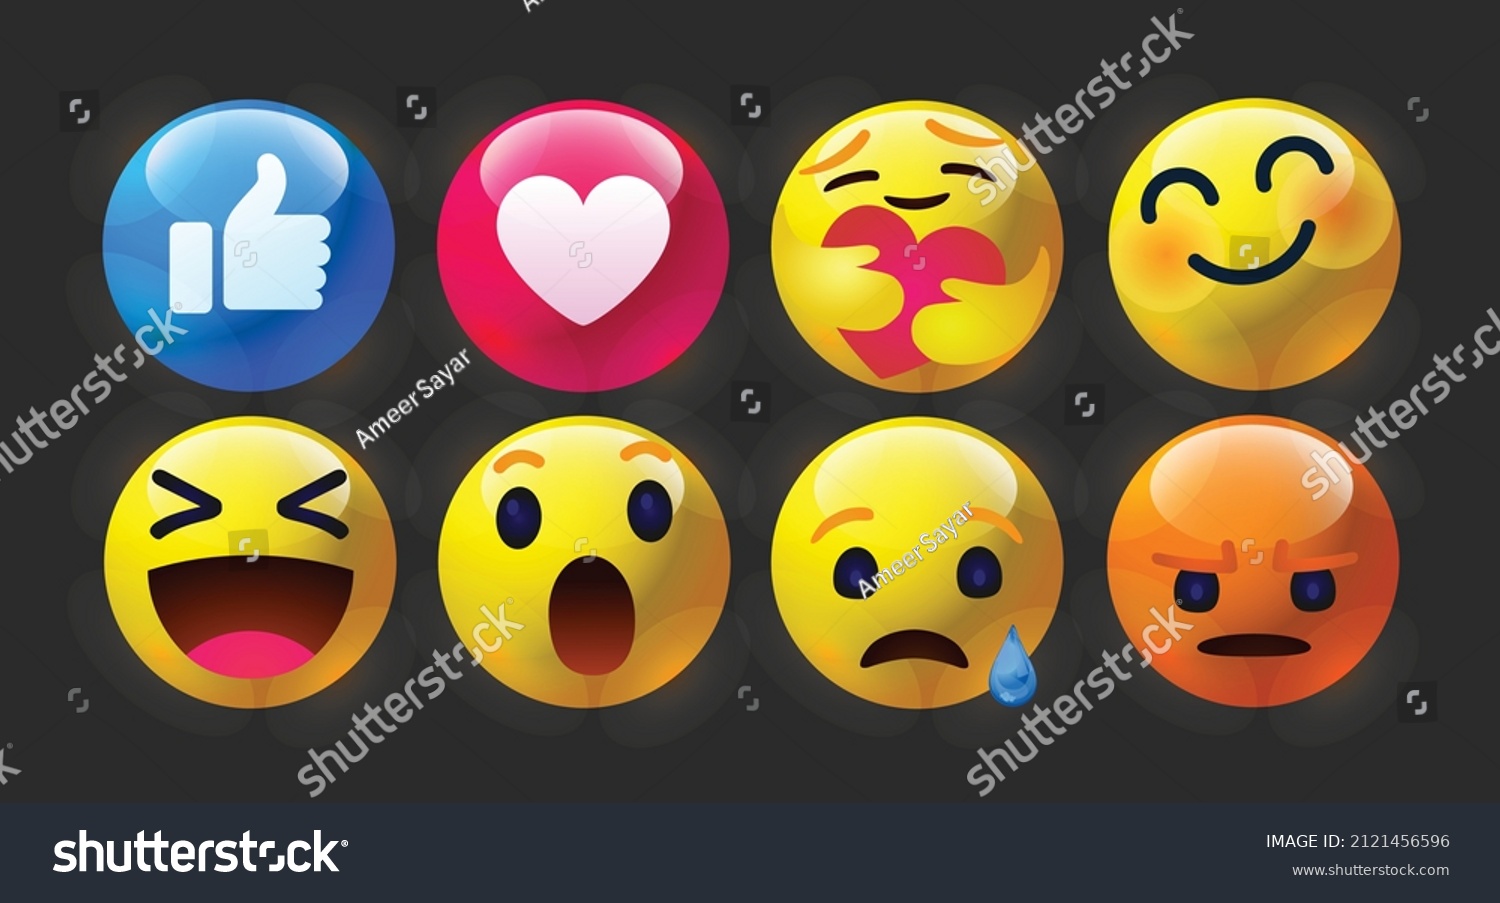 SVG of Emoticons comment social media Facebook chat high quality vector 3d round yellow cartoon bubble comment reactions icon template face tear smile sad hug love like Lol laughter emoji character message svg